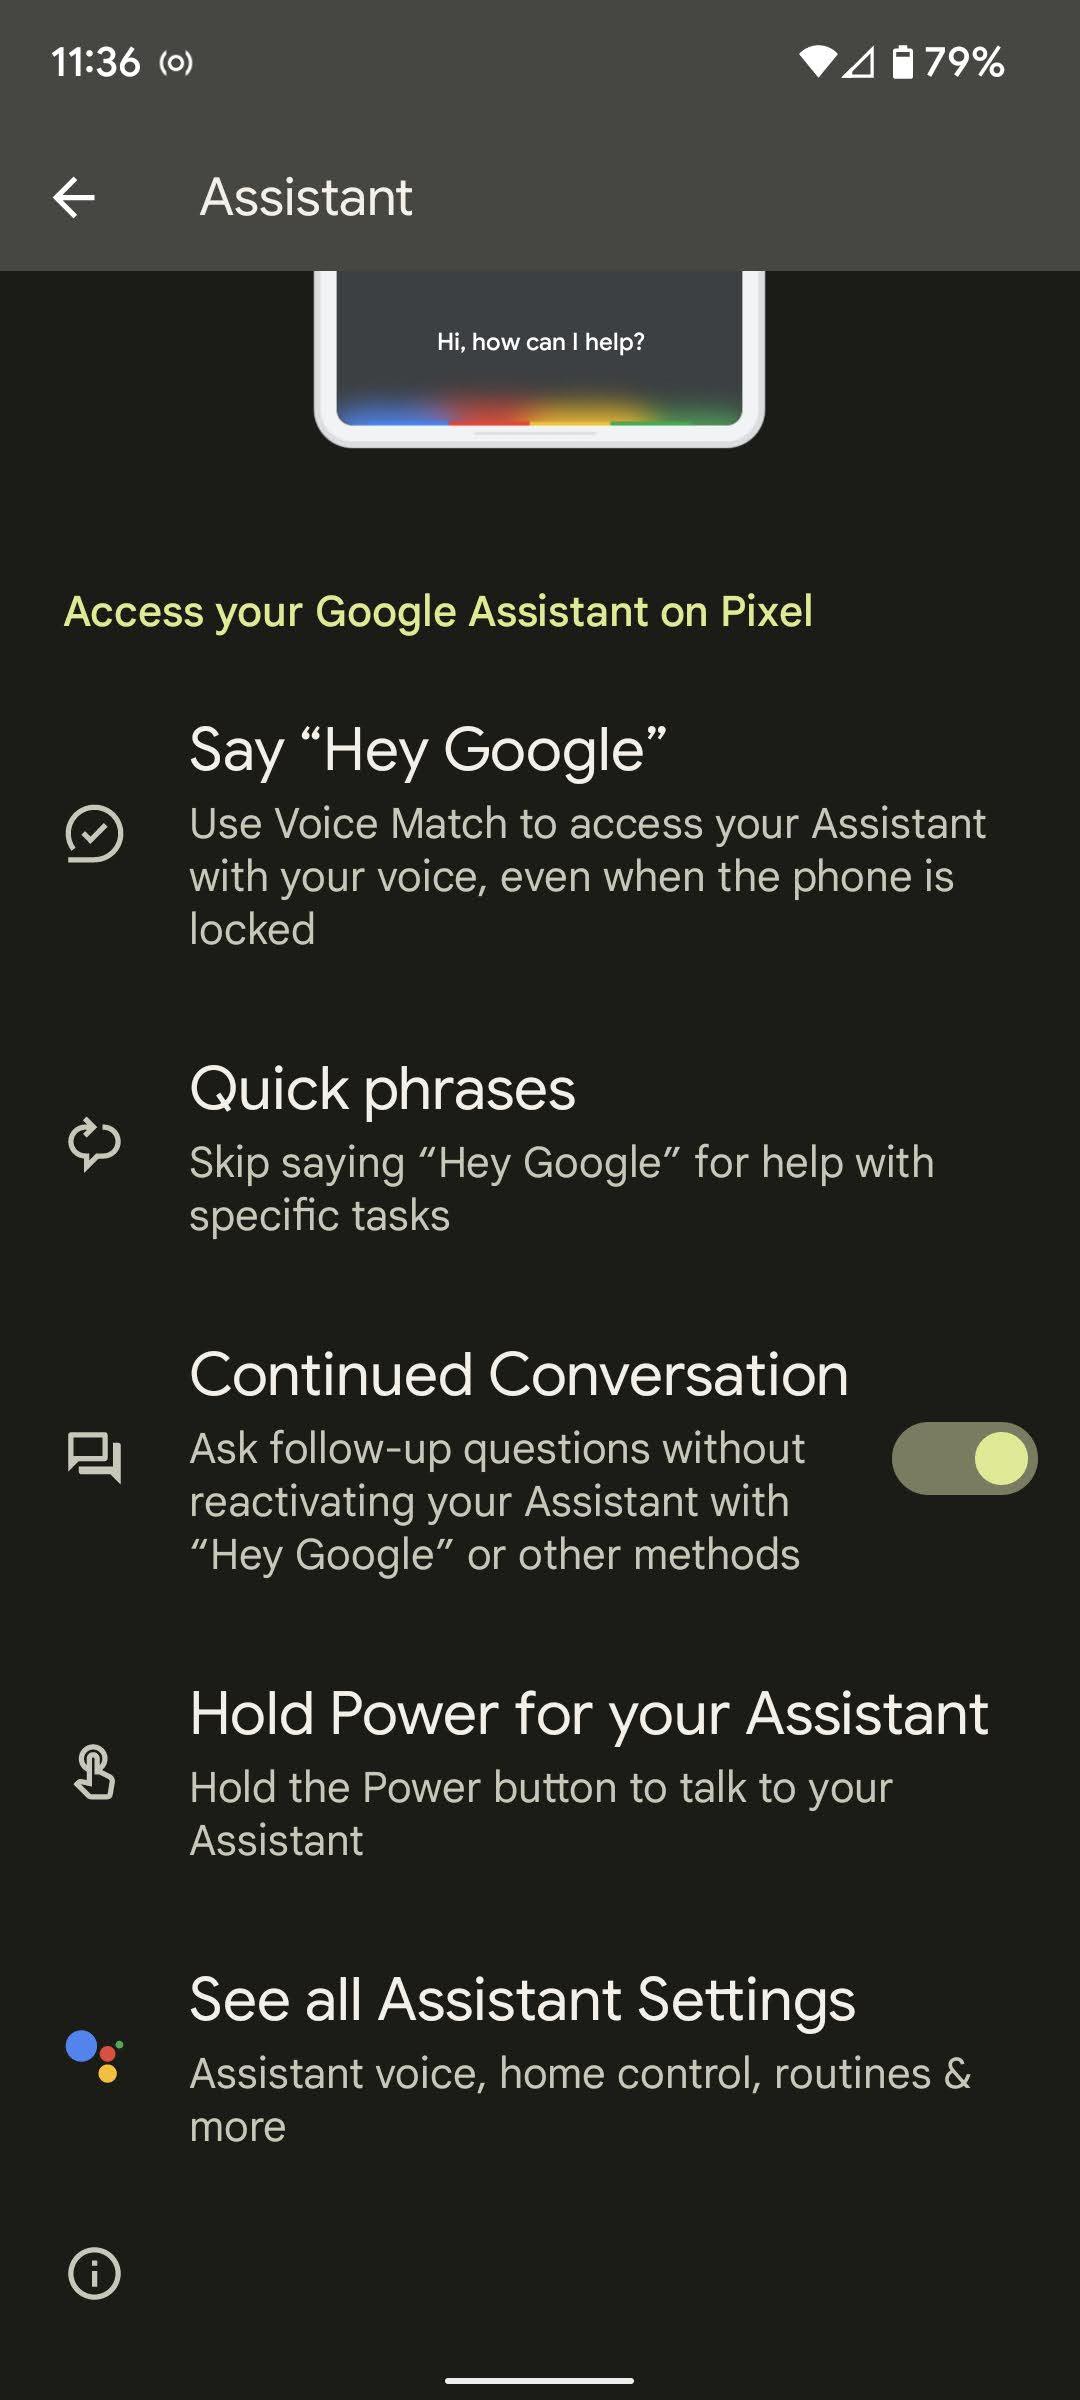 How To: Use Your Pixel's Power Button to Bring Up Google Assistant Instead of the Power Menu